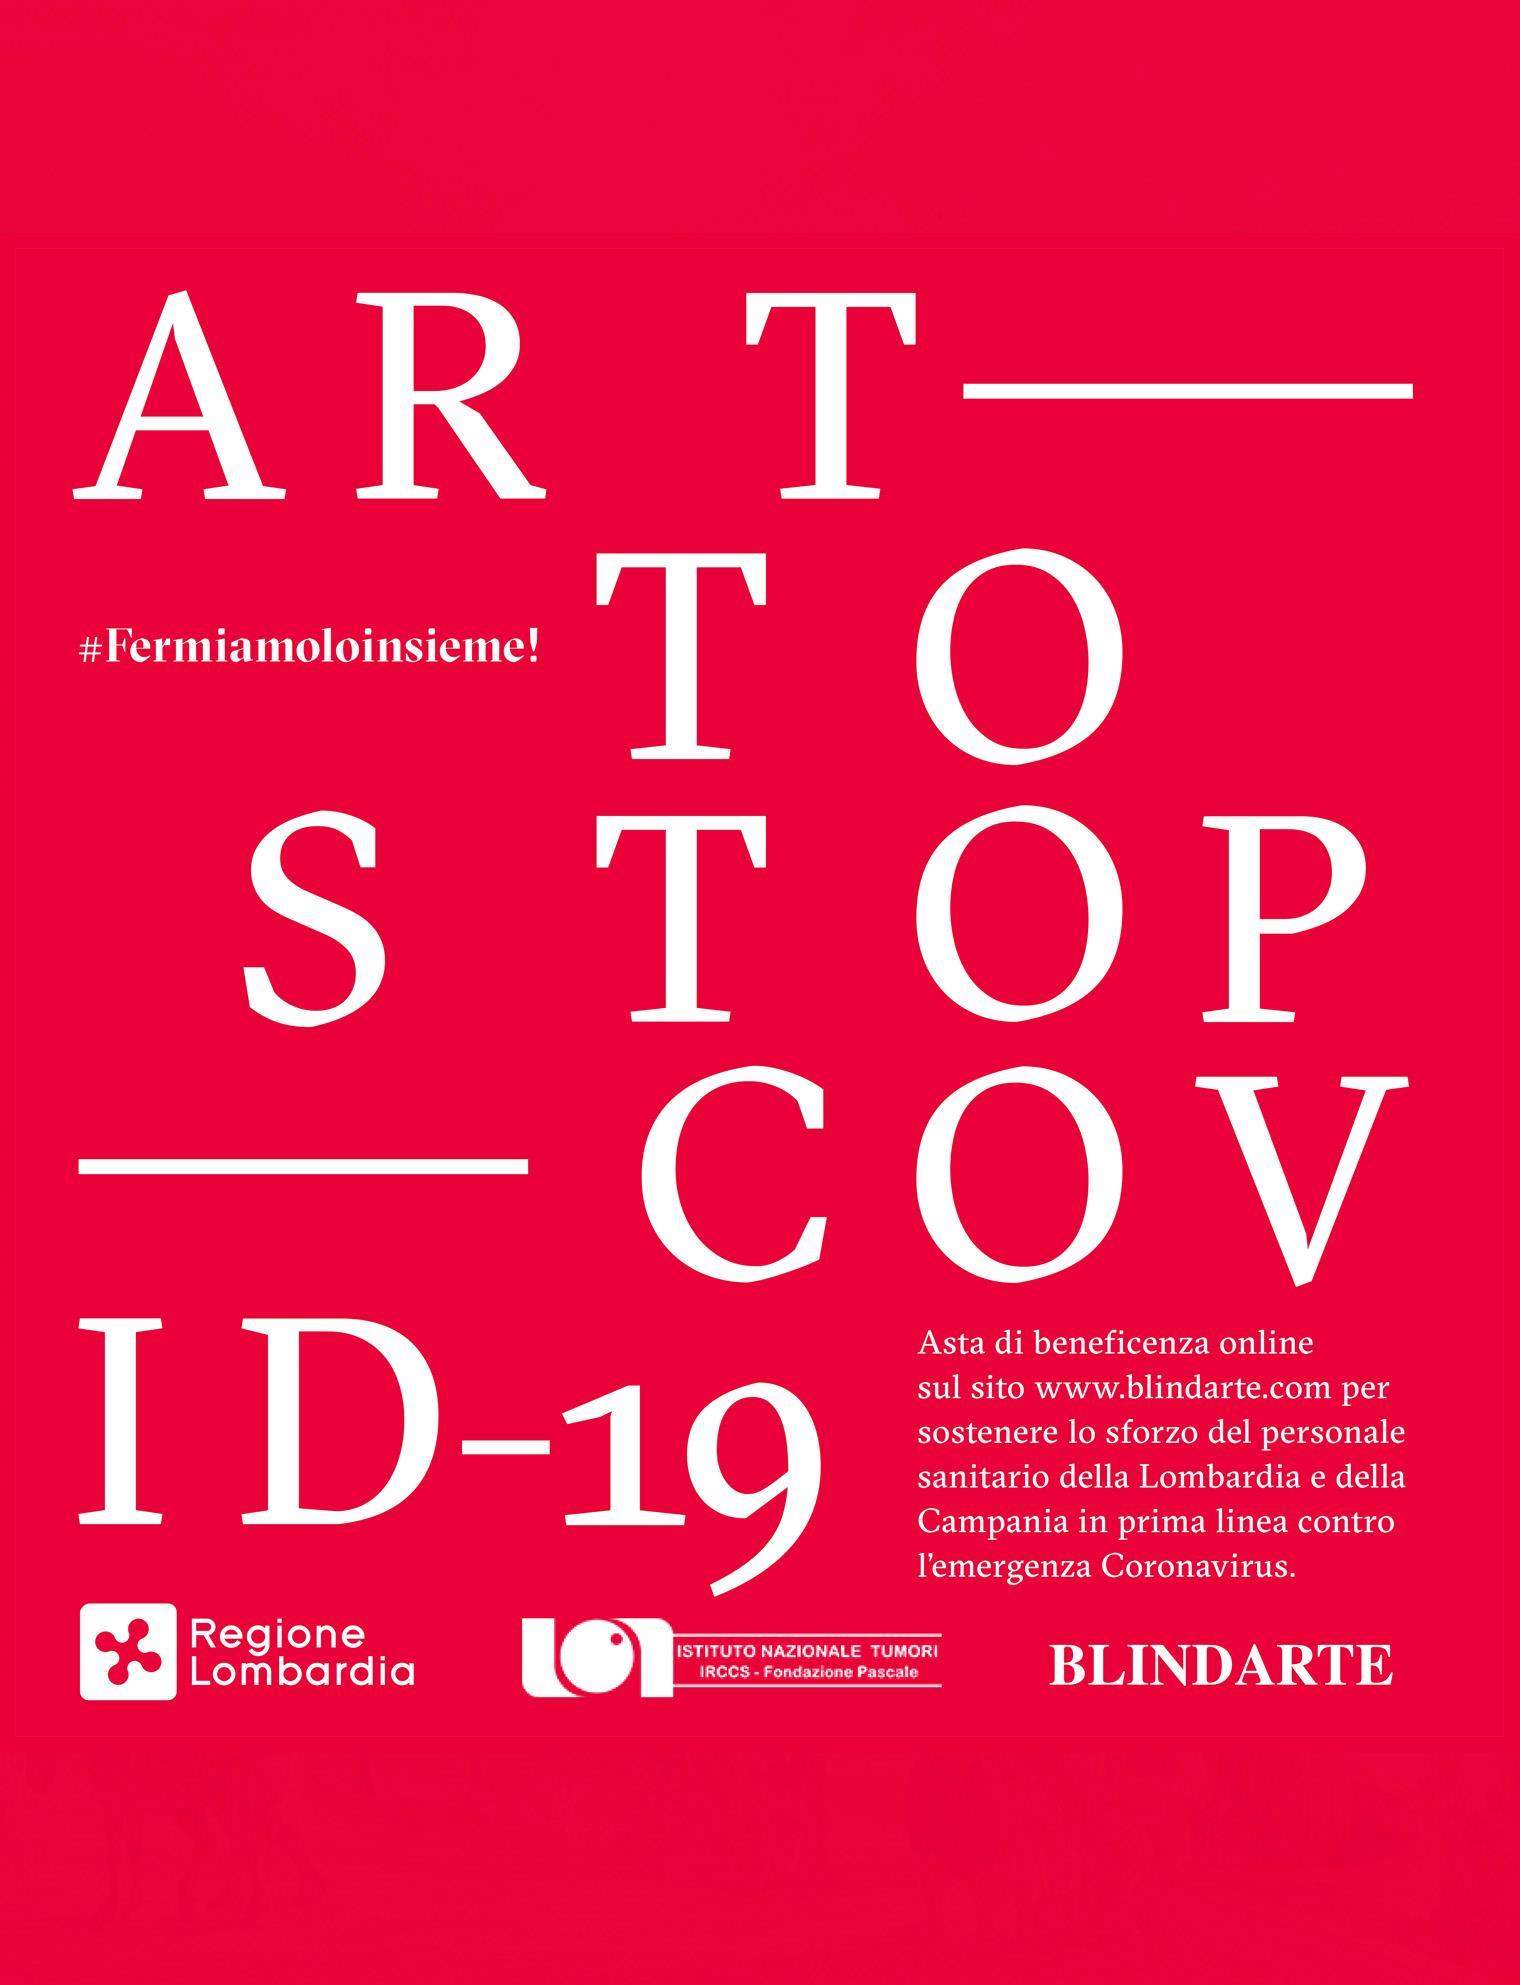 Blindarte offers a sale of works by leading contemporary Italian artists to raise funds against Covid-19